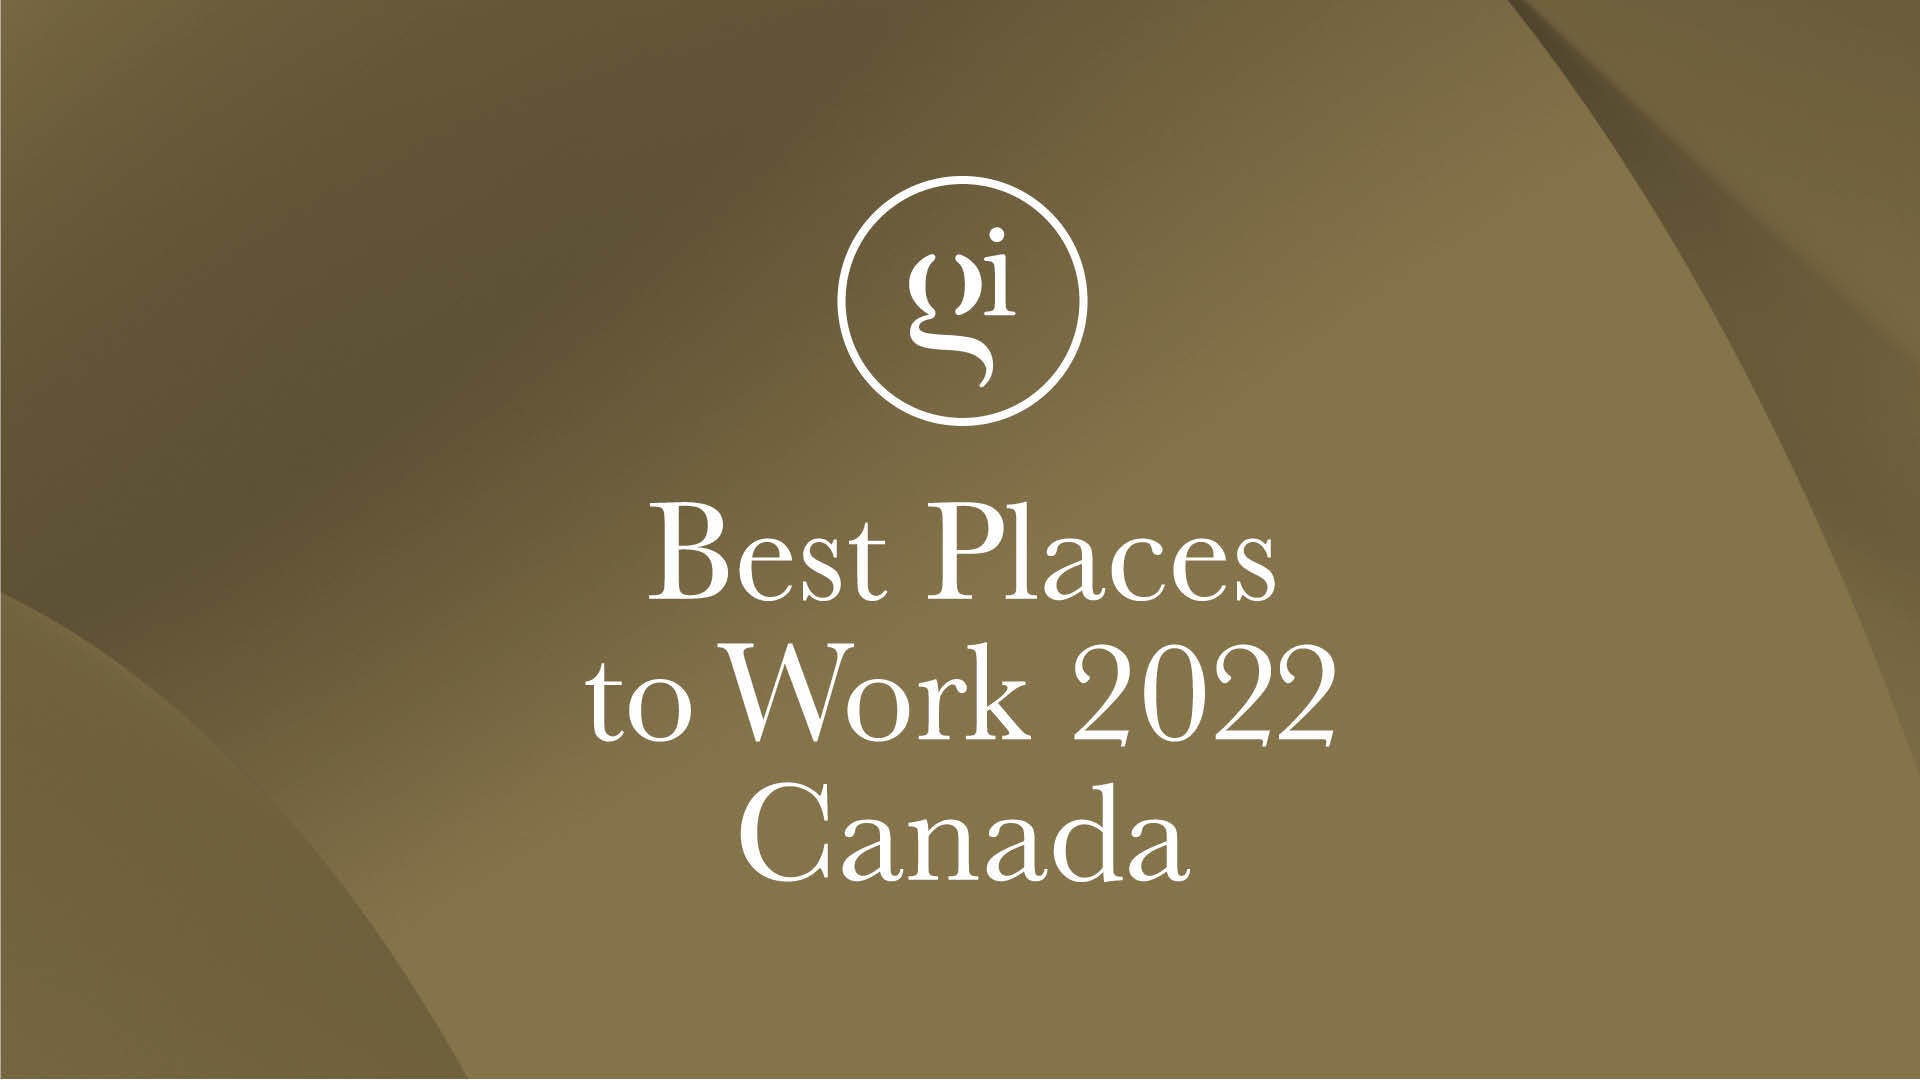 Just one month left to enter Best Places To Work Awards Canada